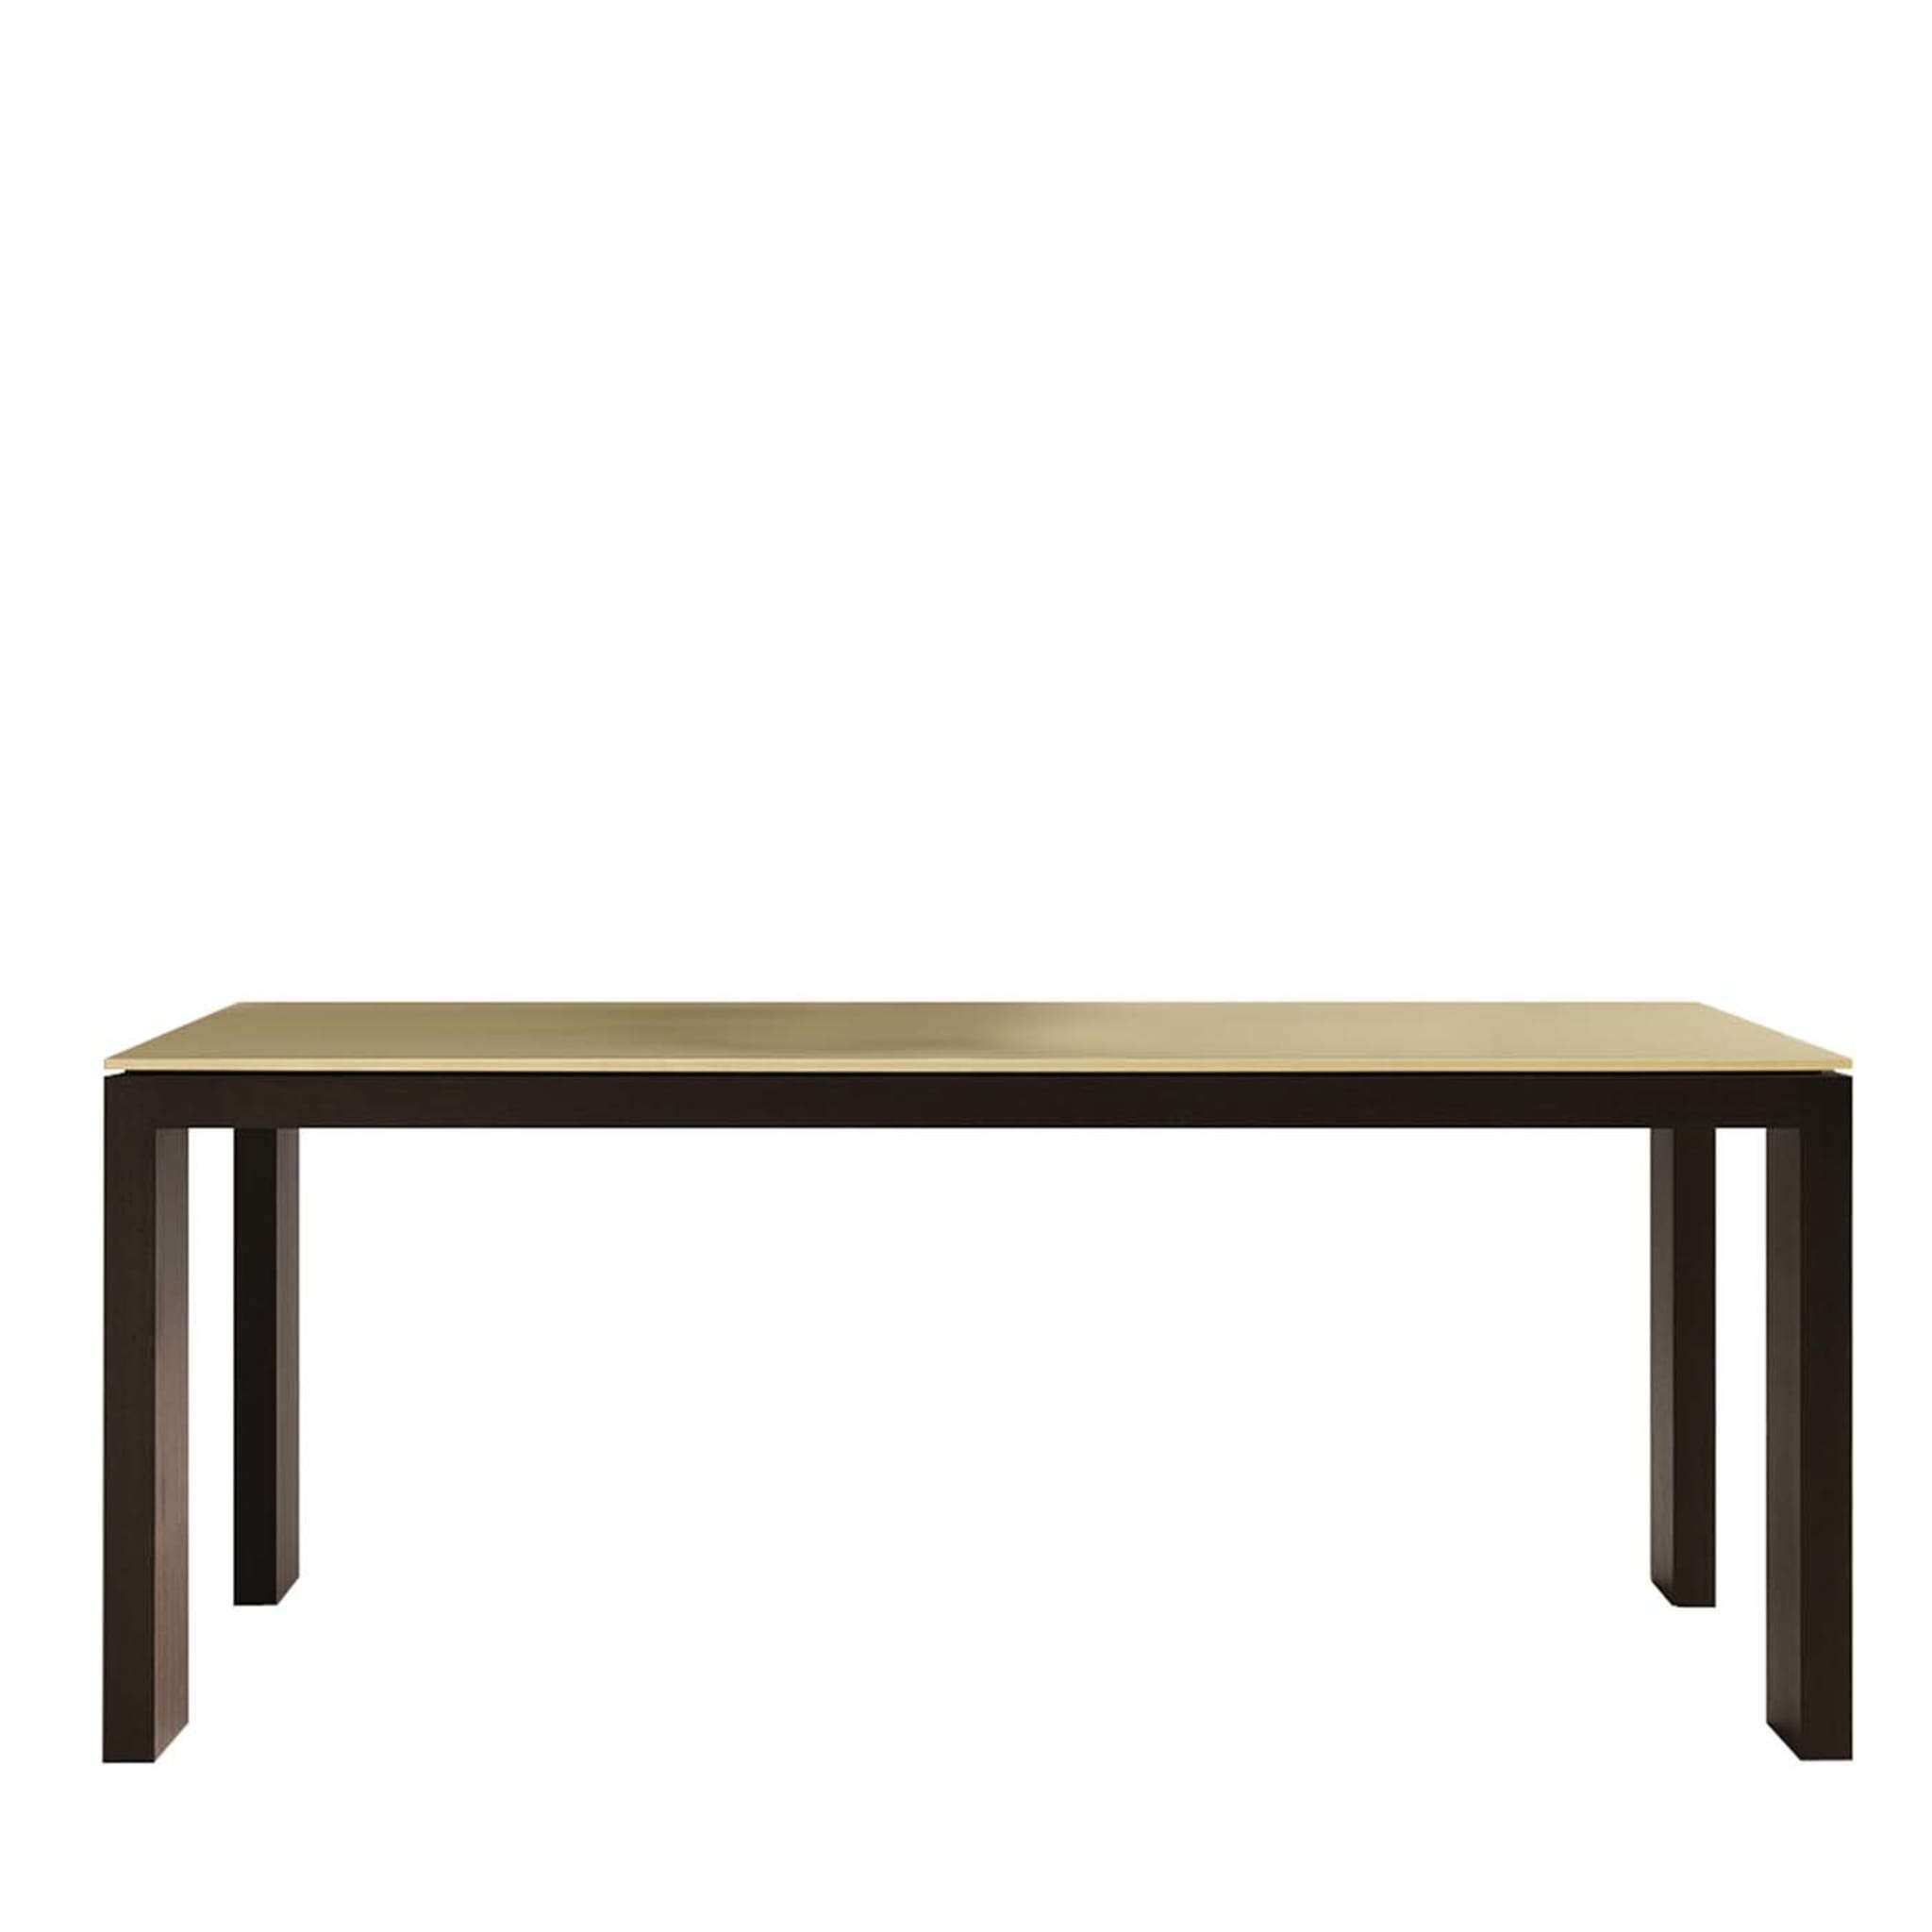 Pedaso Wood Dining Table - Main view